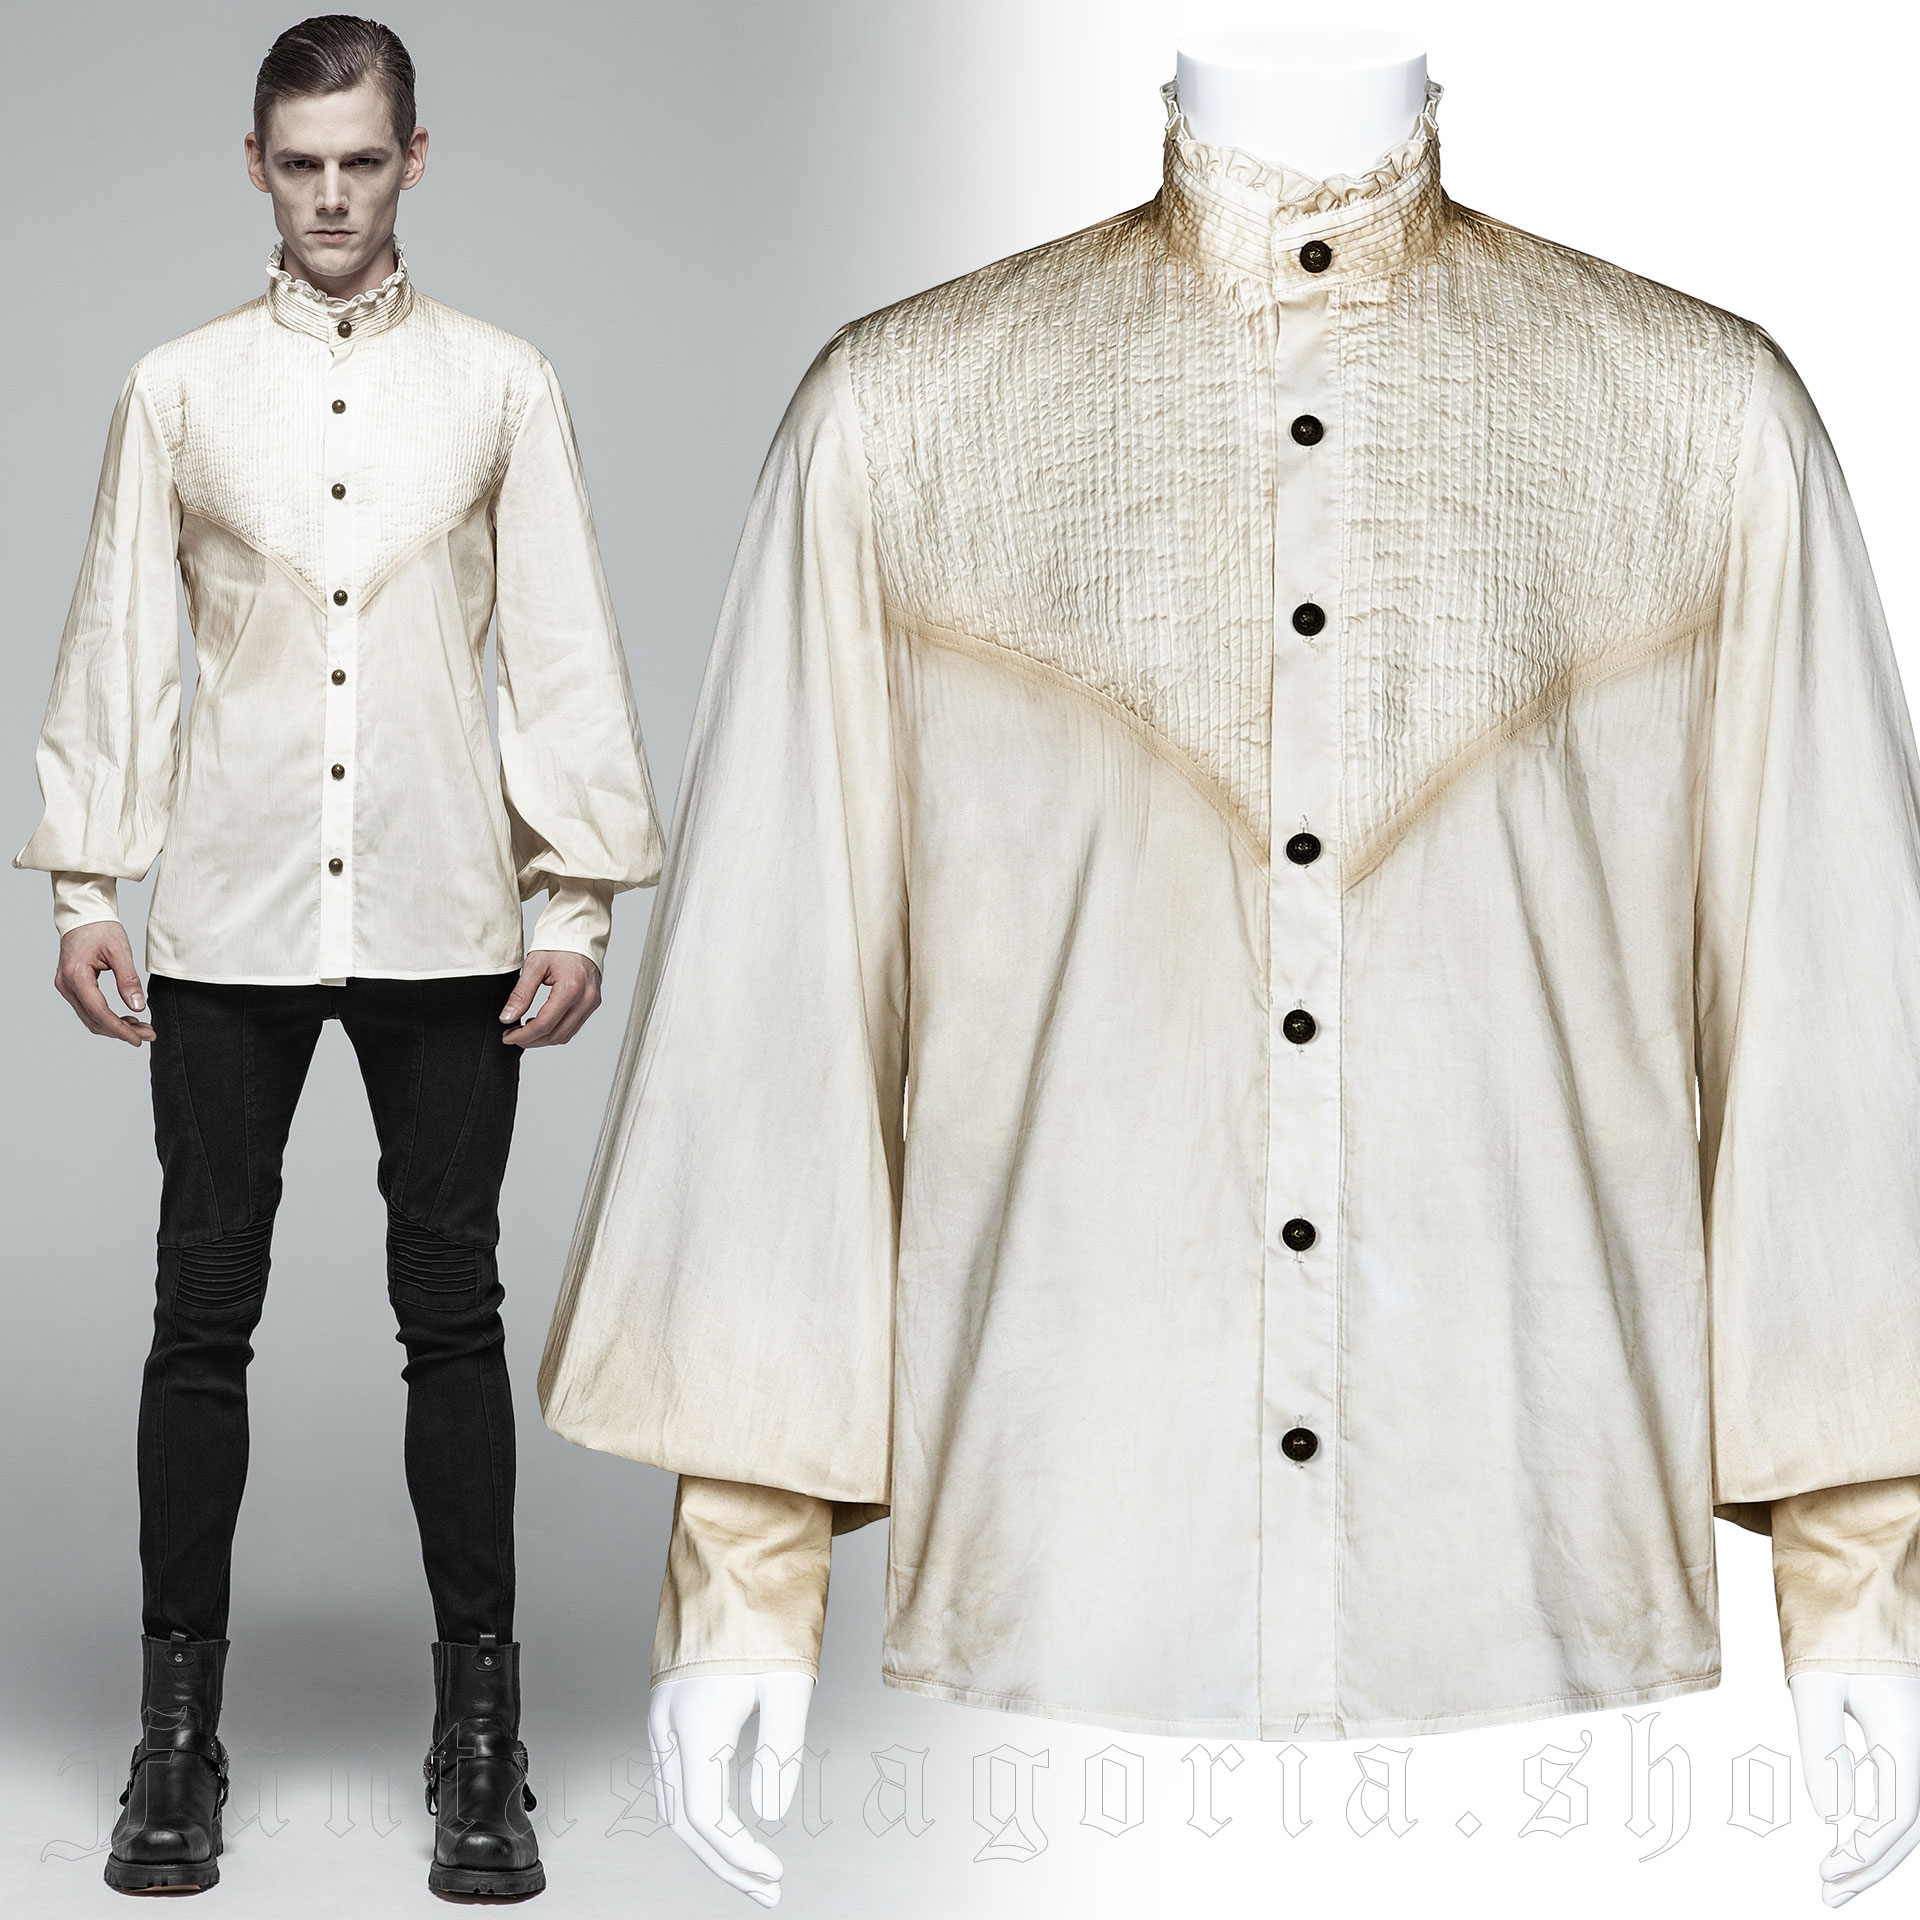 Aged-looking shirt with bishop style sleeves by Punk Rave..